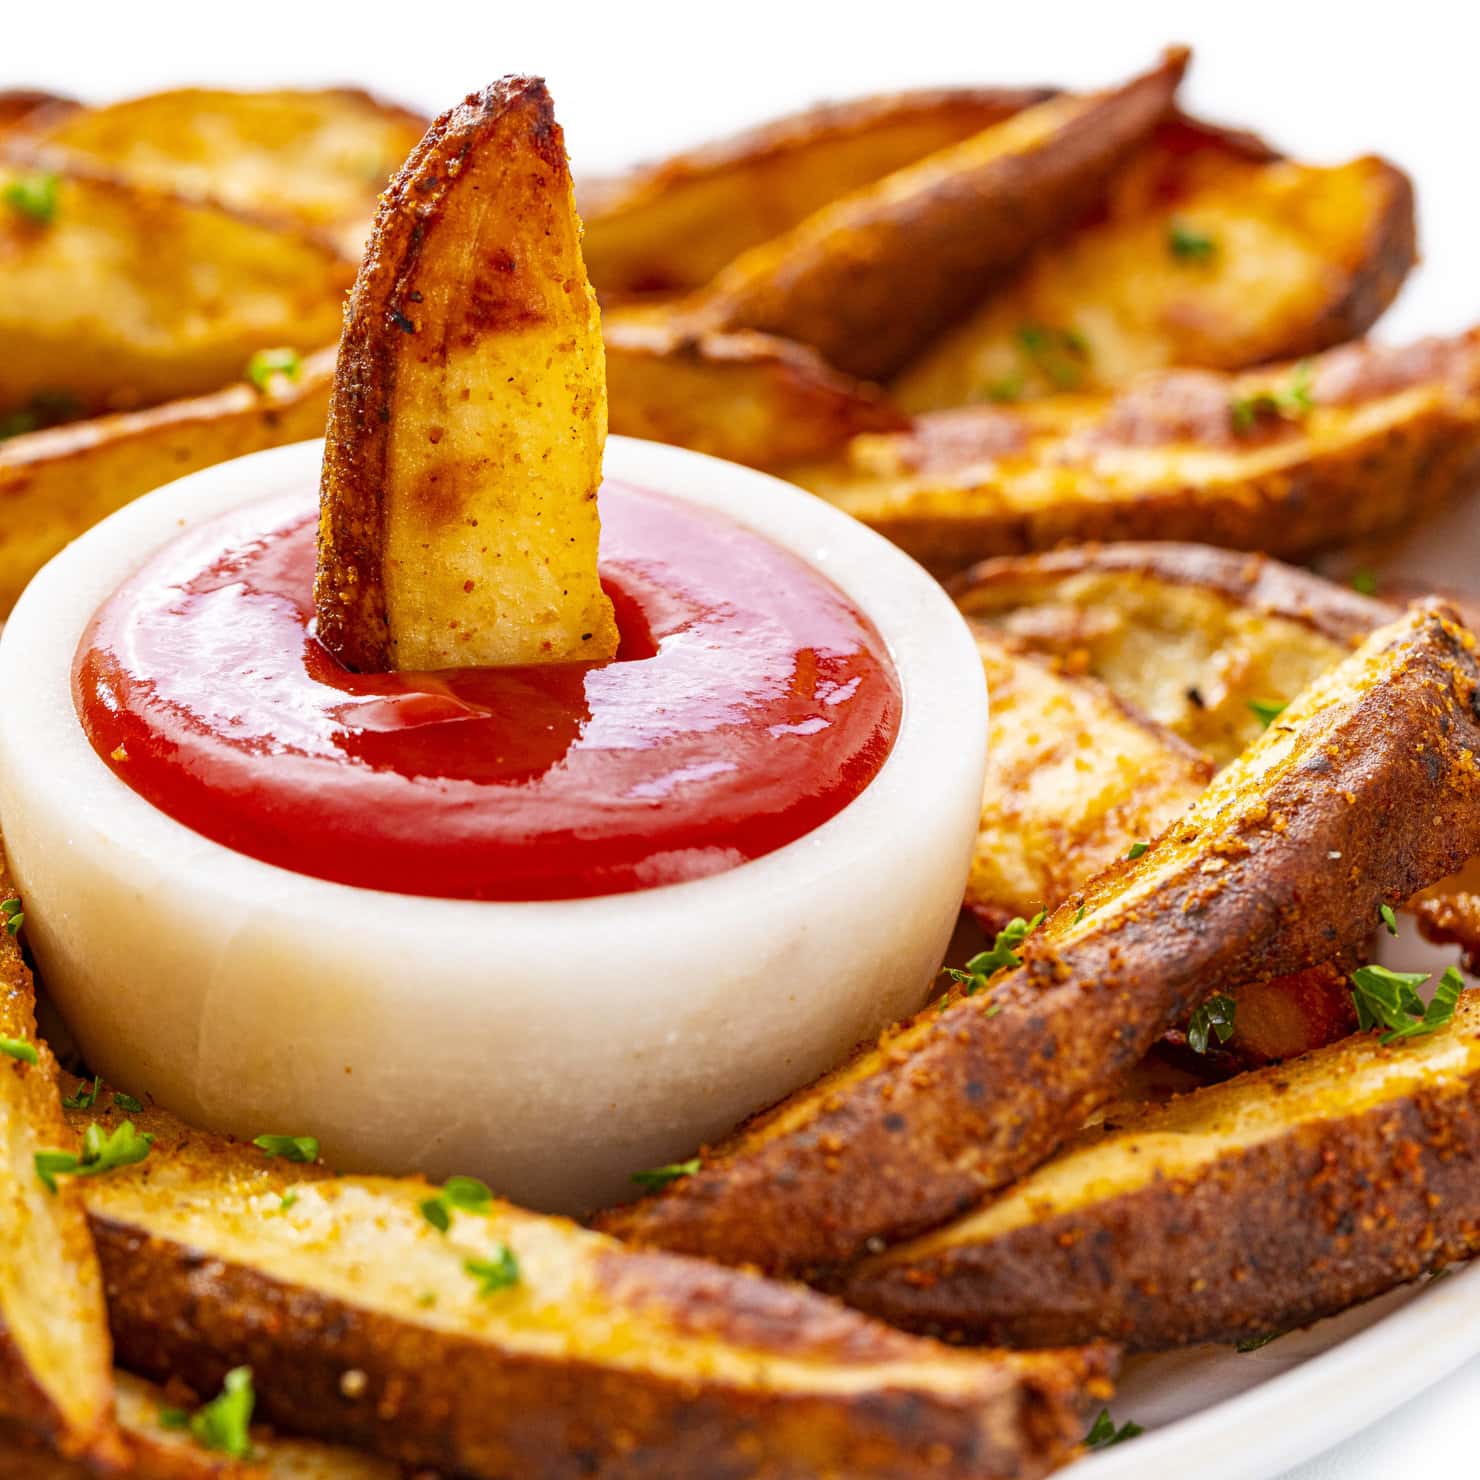 Steak fries on a plate with one dunked in ketchup.